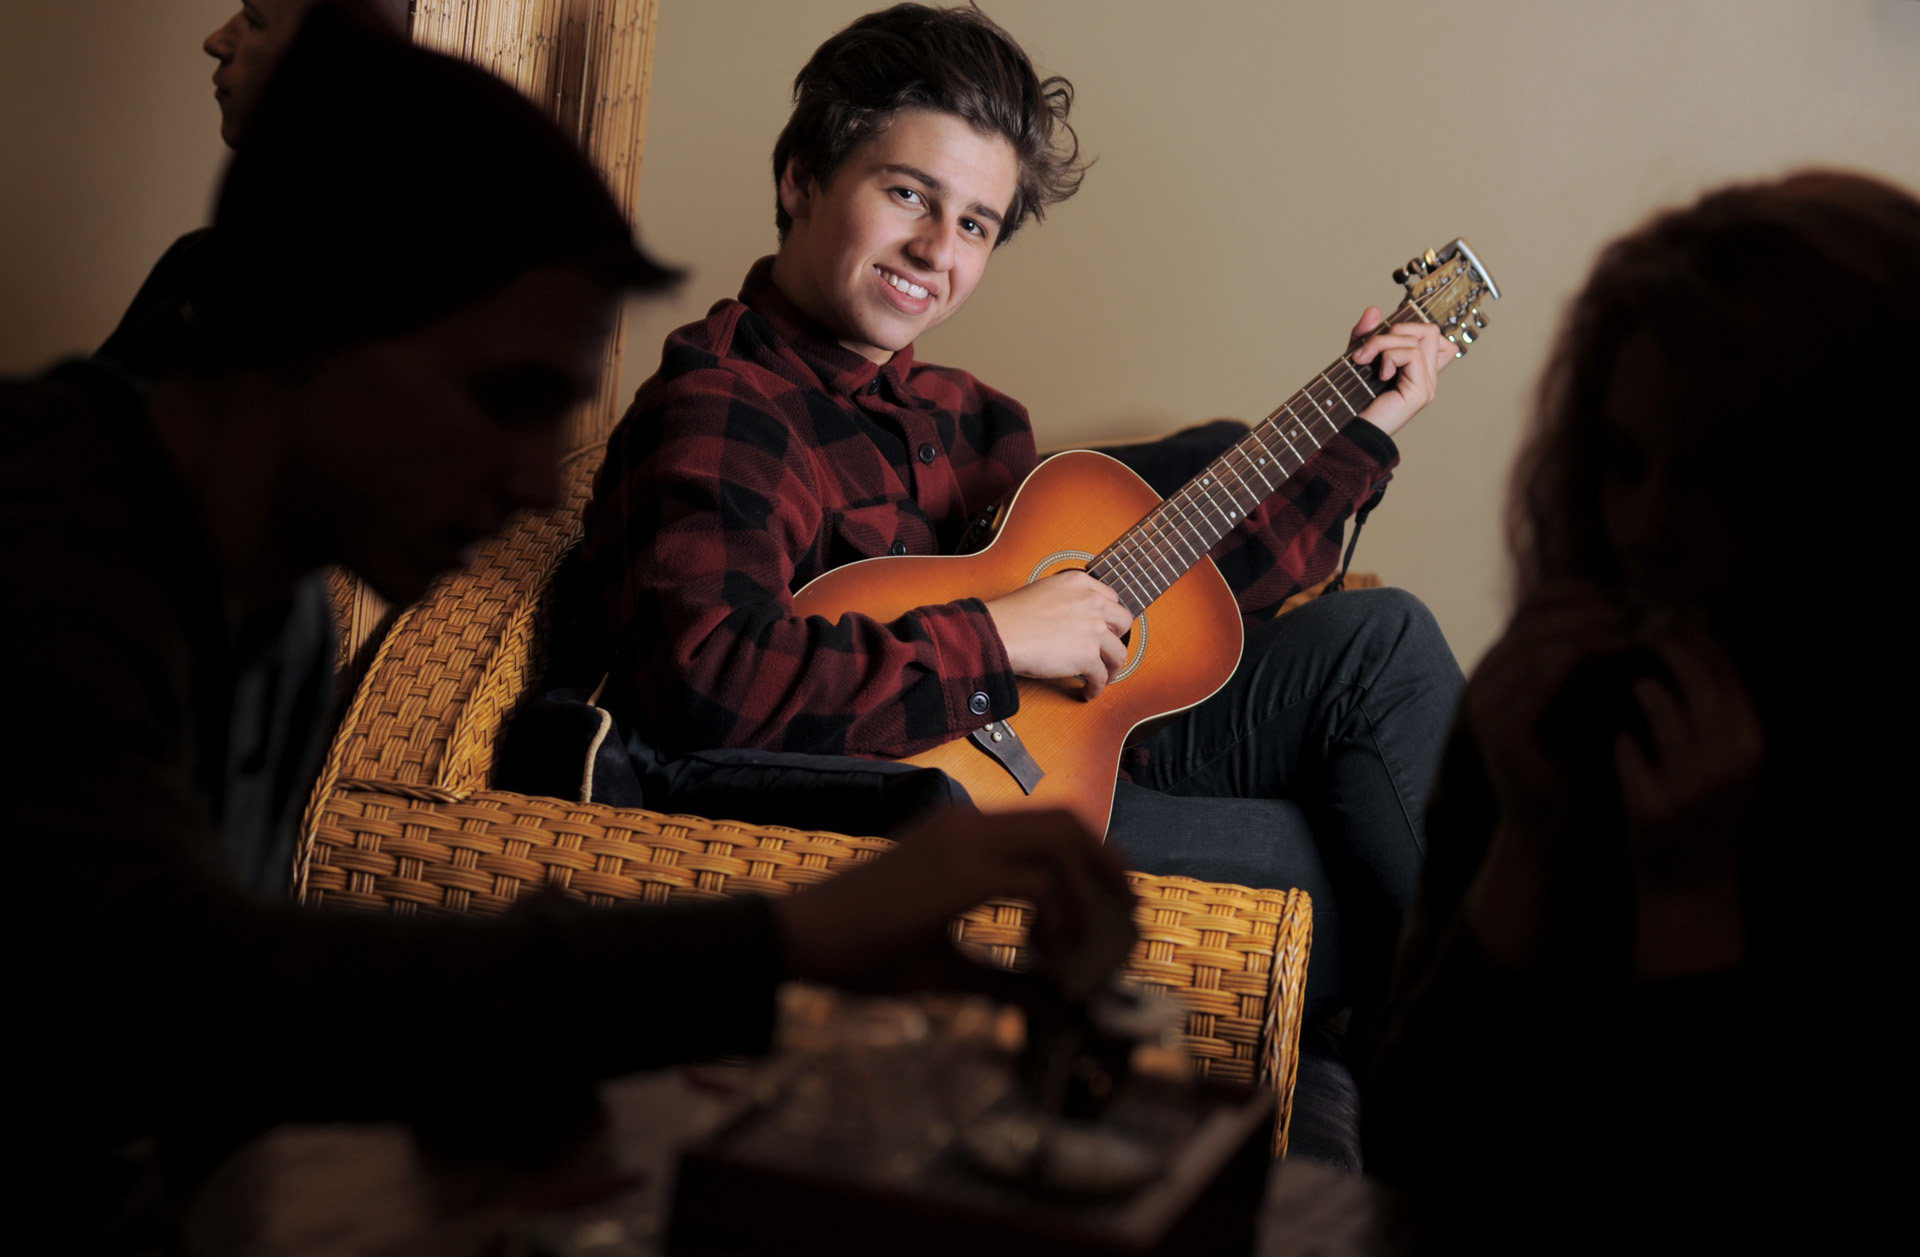 A Royal Oak, Michigan senior hangs out at his favorite coffee bar playing his guitar in this unique senior photo.